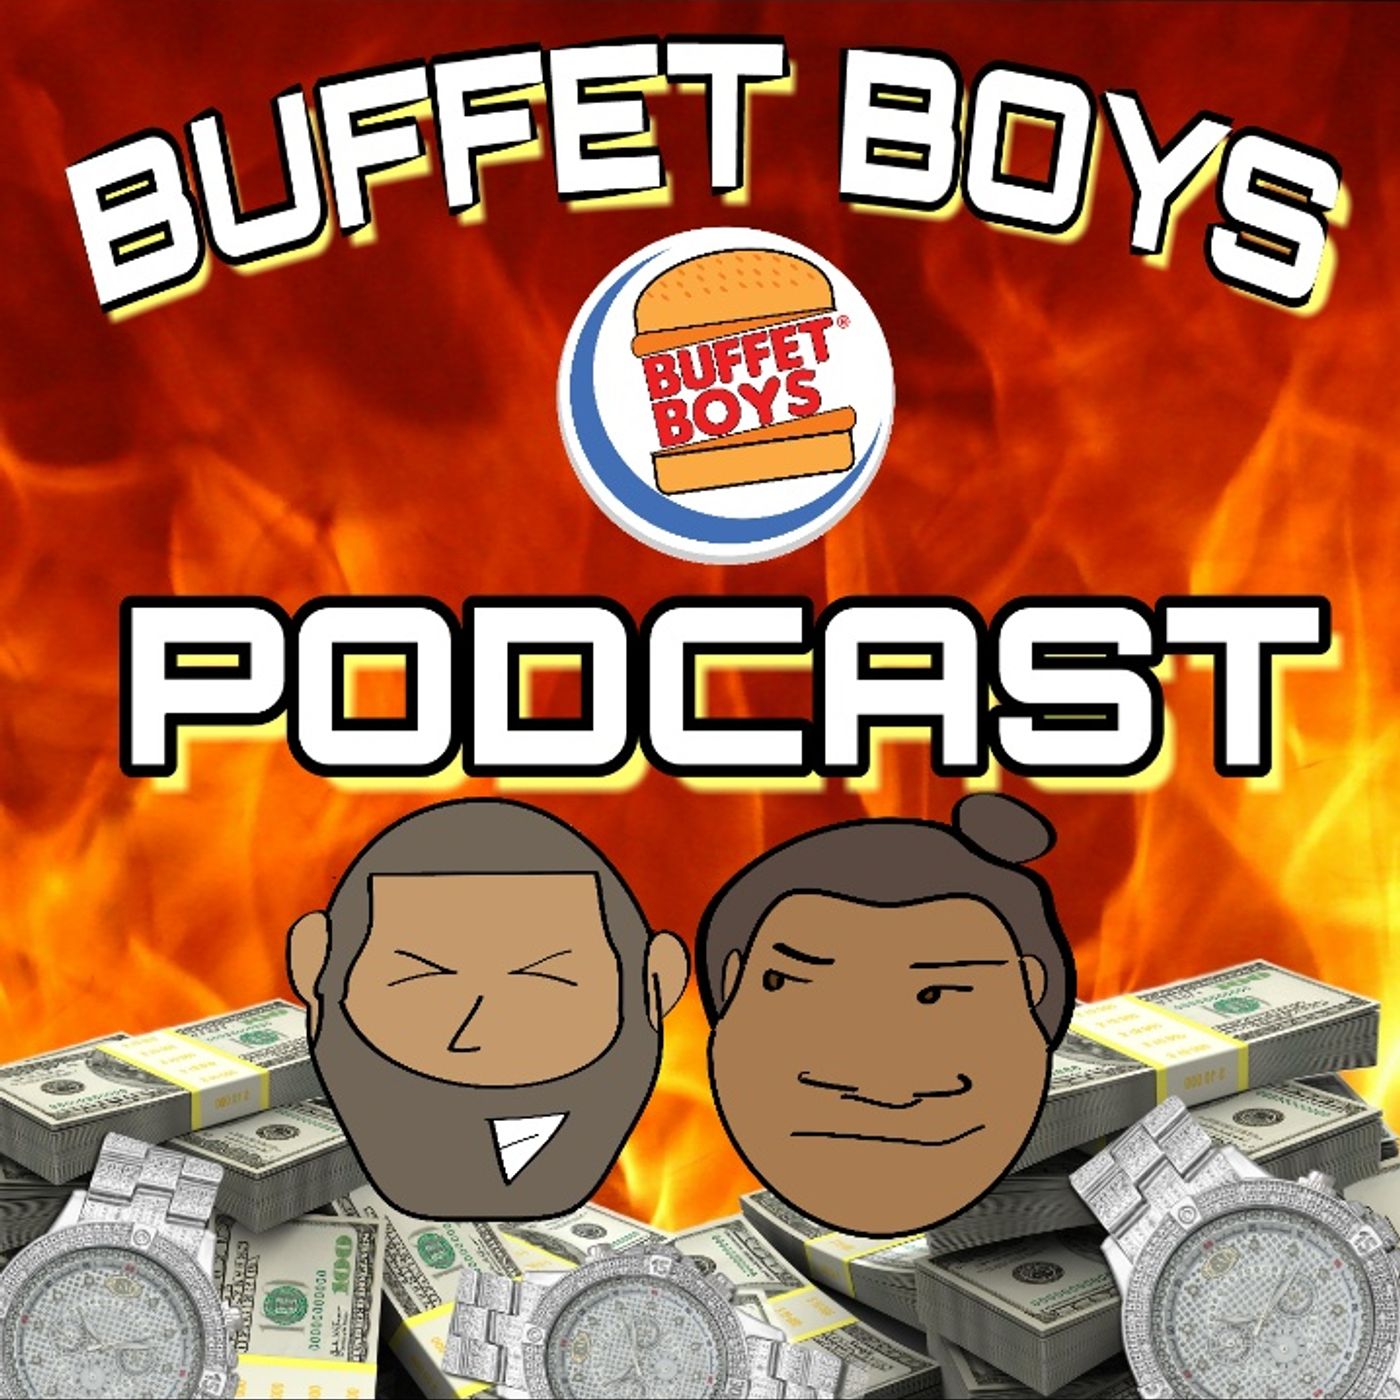 The Buffet Boys Podcast Ep.59: If he dies, he dies